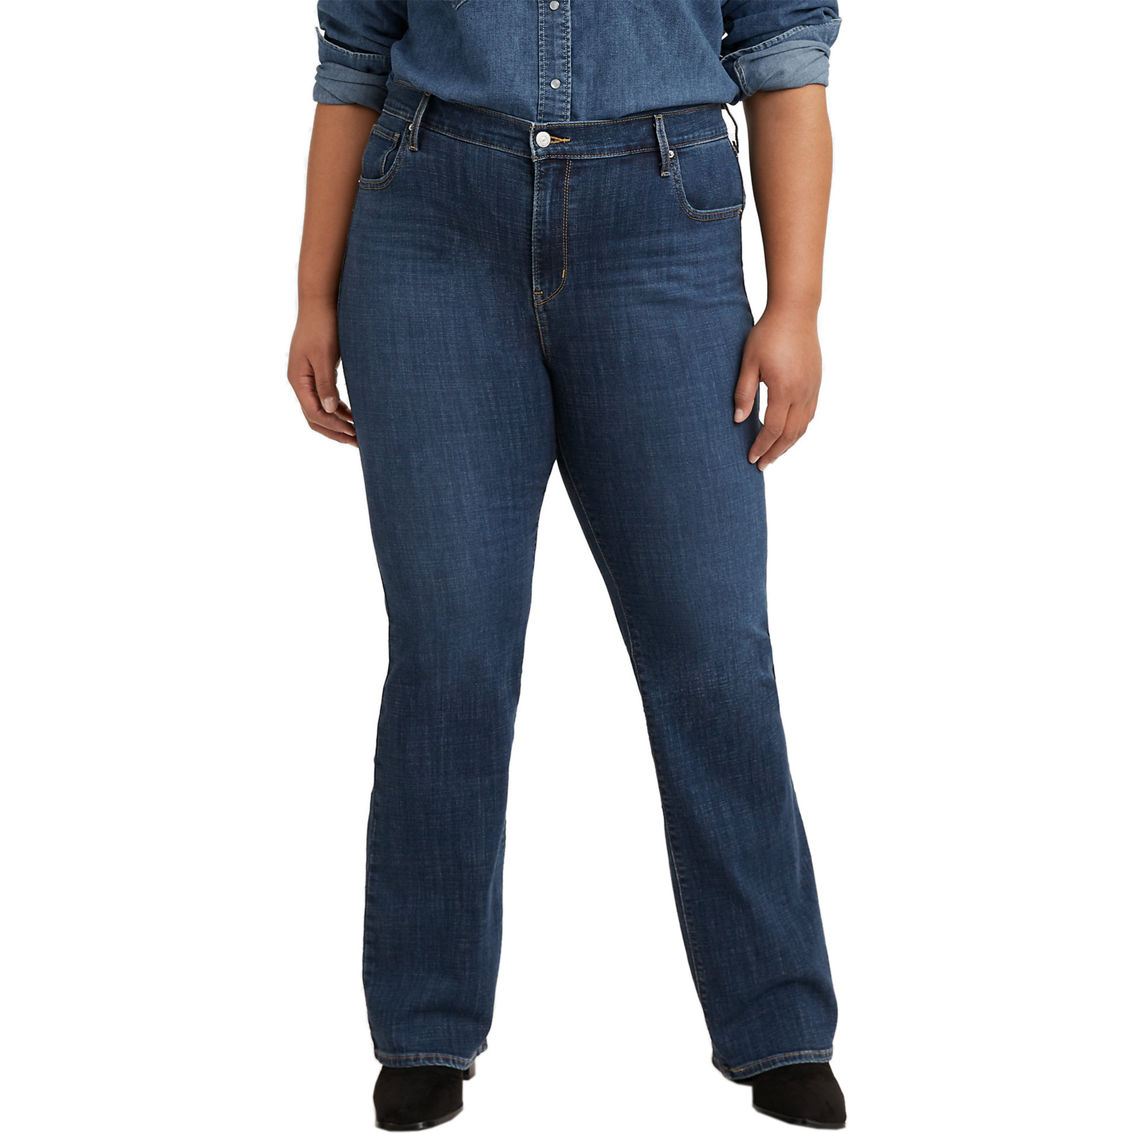 Levi's Plus Size 725 High Rise Bootcut Jeans | Jeans | Clothing ...